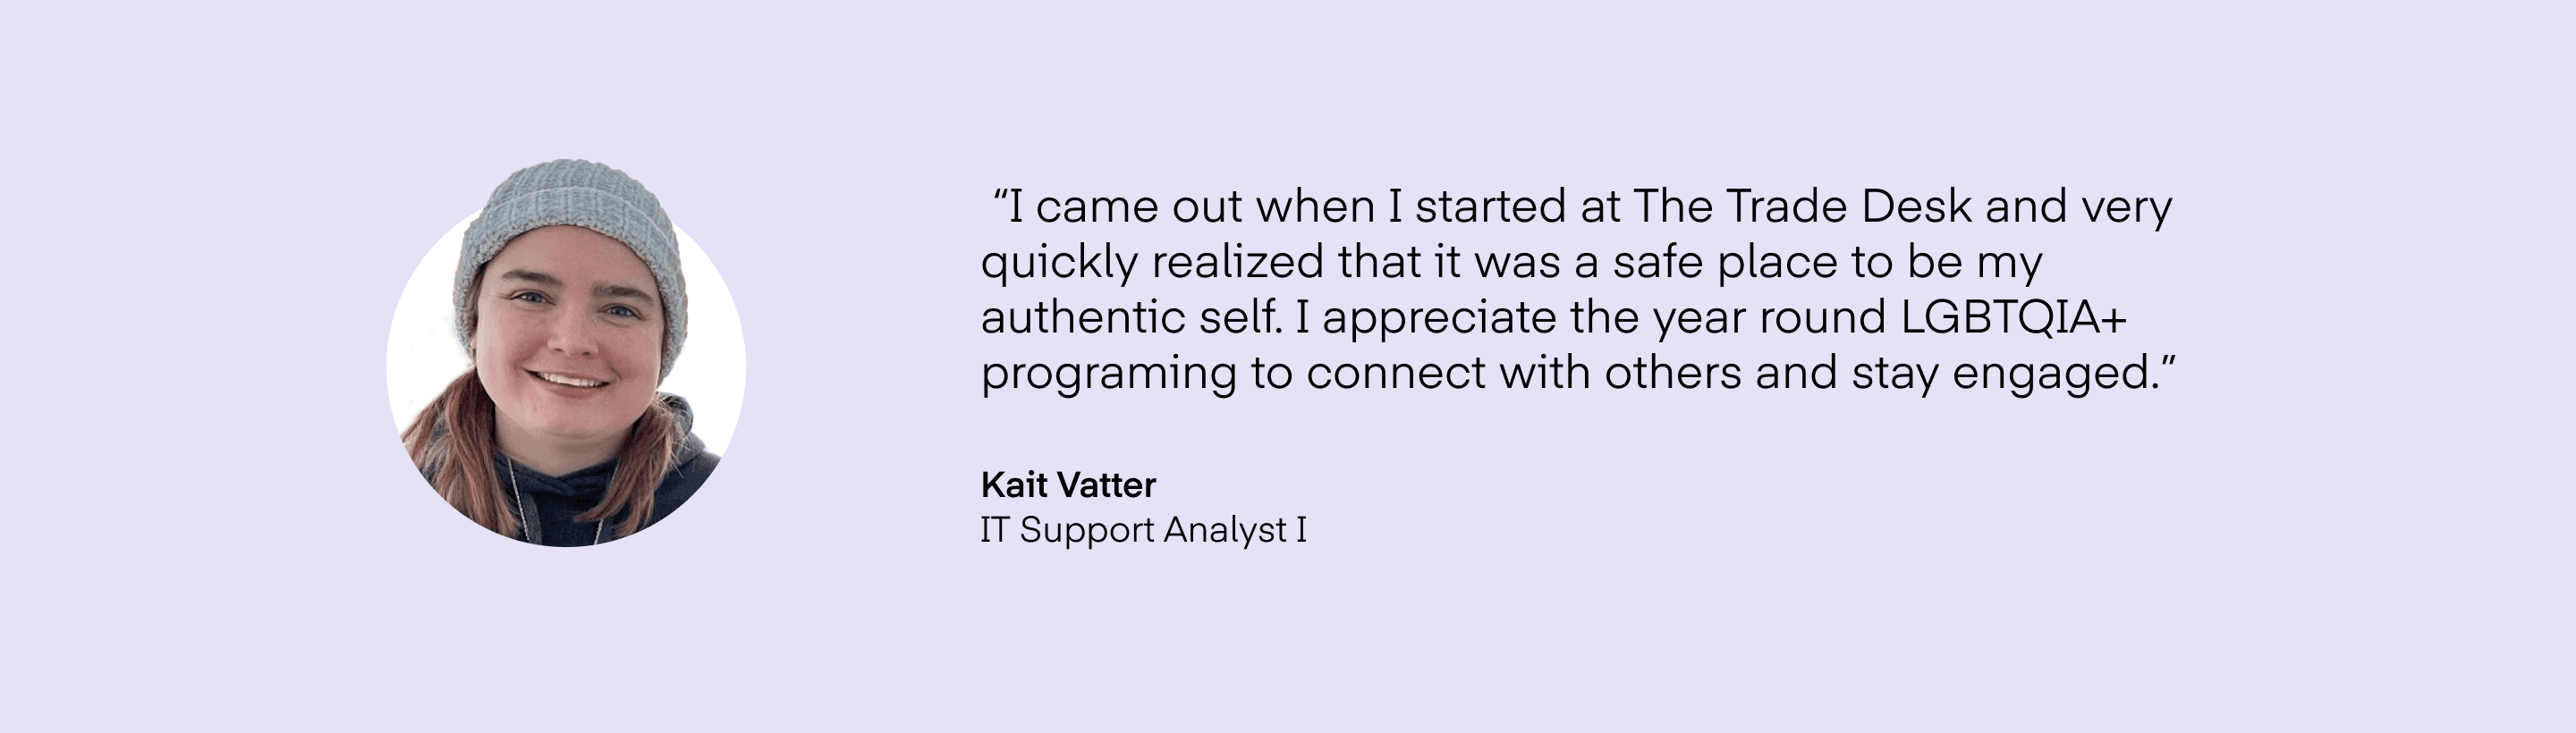 Quote and headshot from Kait Vatter, IT Support Analyst I at The Trade Desk on a purple background